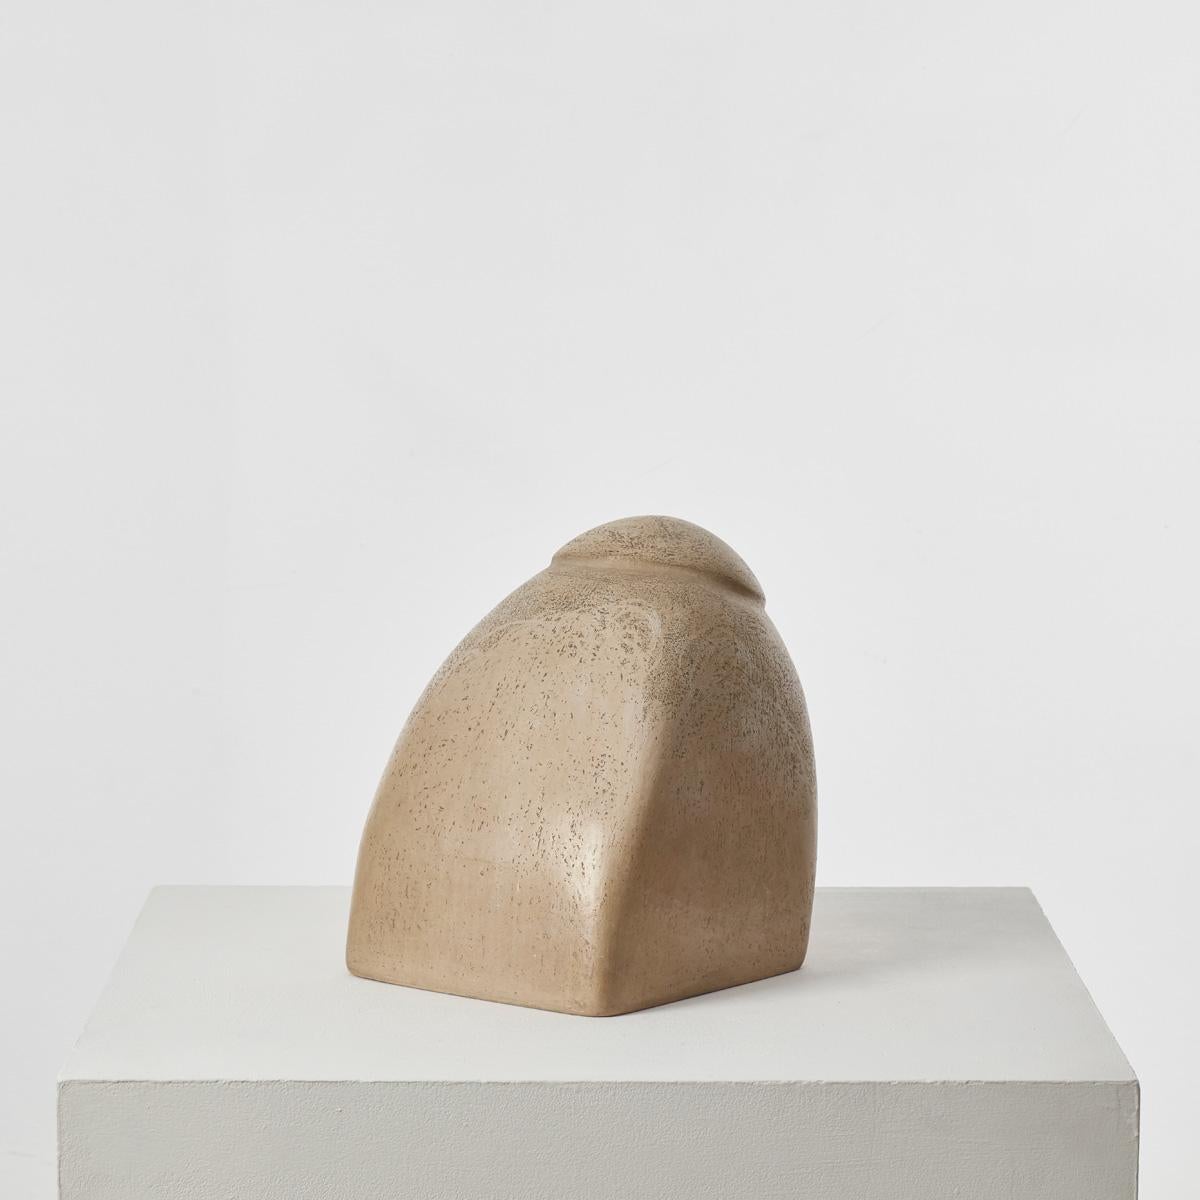 A large, biomorphic plaster sculpture with a burnished finish that sits as a solid piece with a dynamic slanted axis. It was previously owned by Sir Terence Conran (1931 - 2020). Conran, an inimitable design pioneer and businessman, “did more than